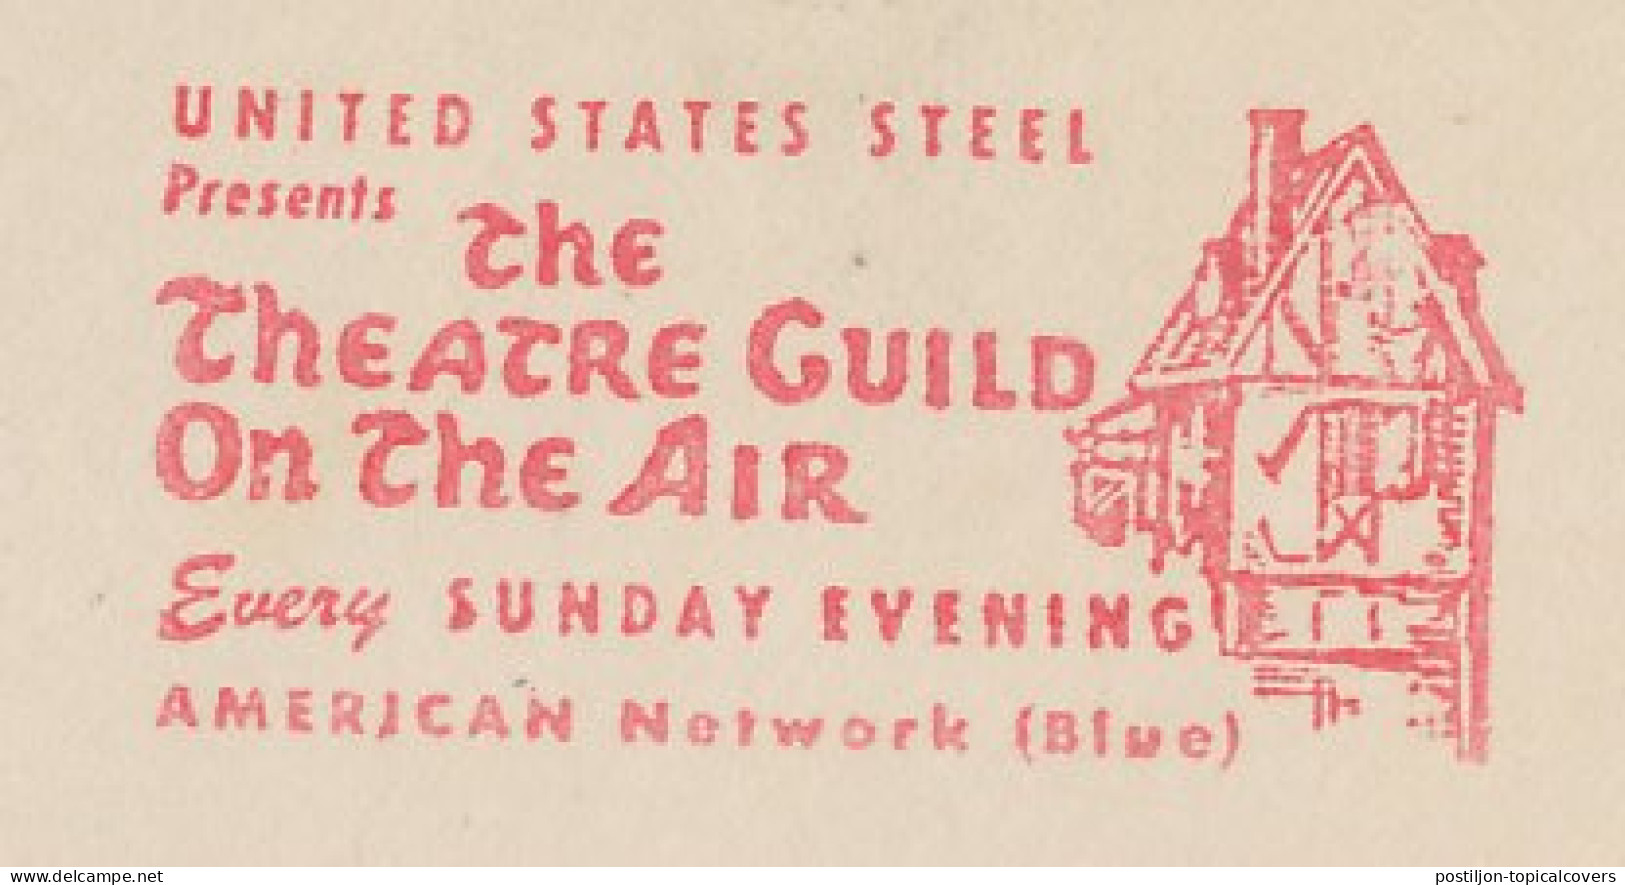 Meter Top Cut USA 1945 Radio - The Theatre Guild On The Air - Non Classés